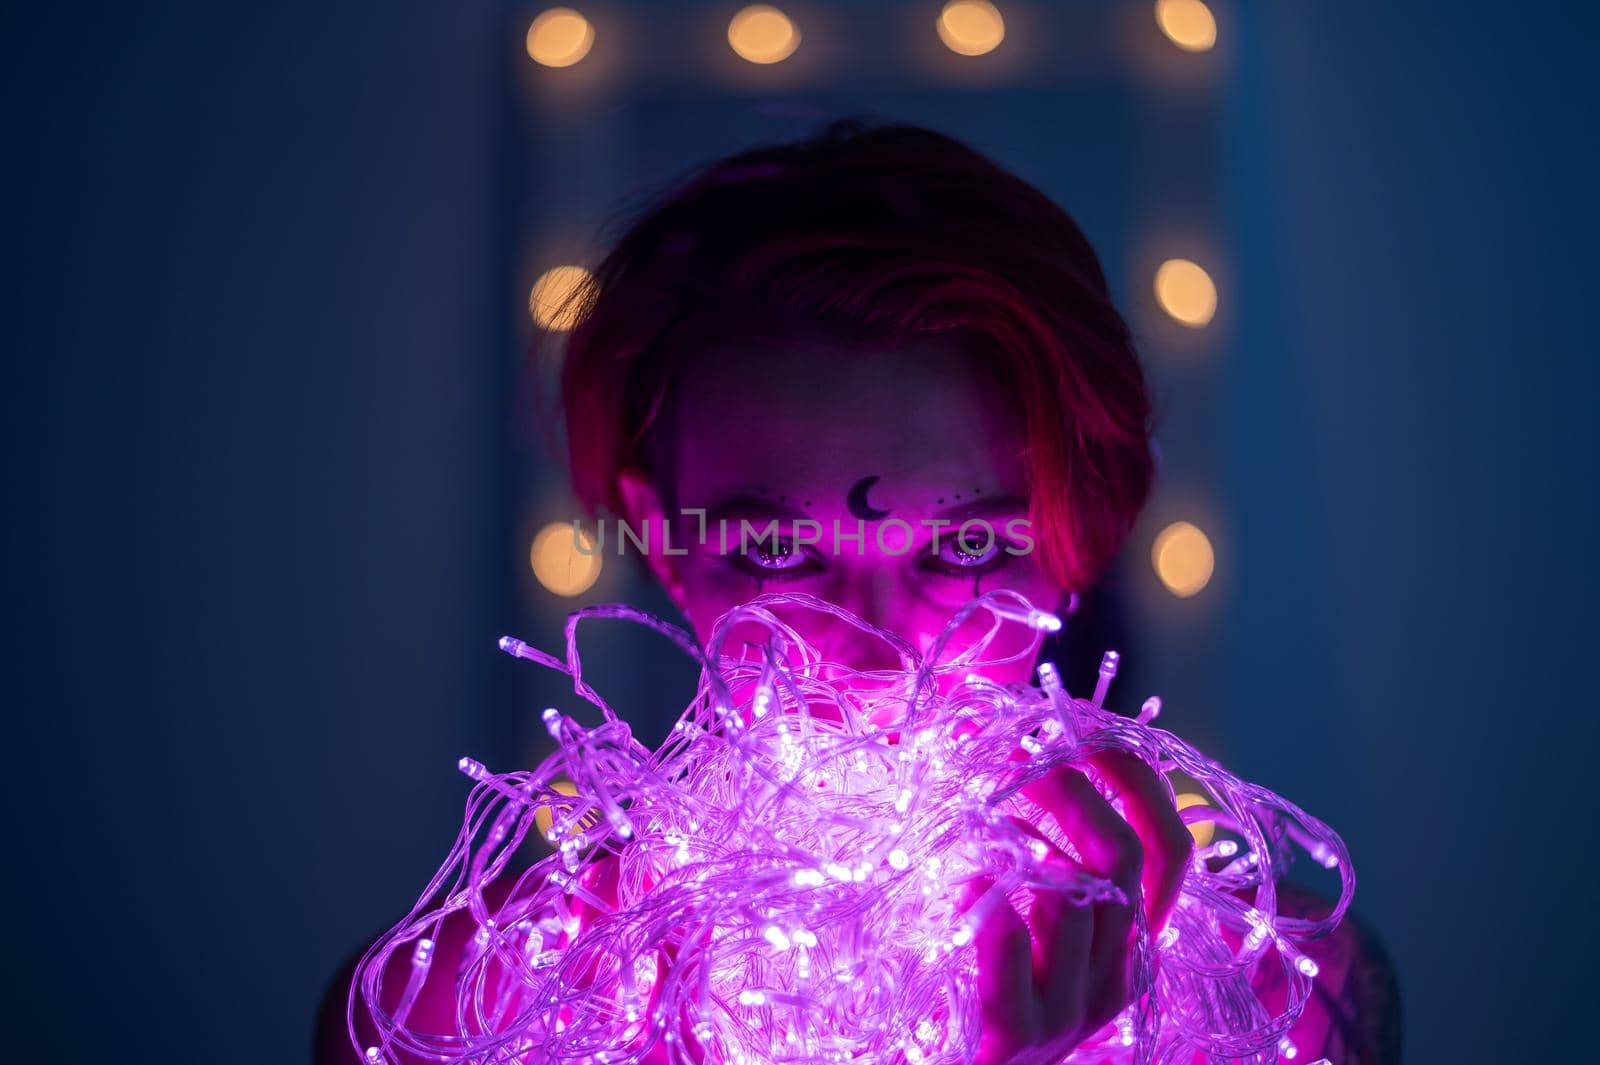 Woman with witch makeup and an earring in her nose. The girl holds a garland of flickering pink lights near her face. Light bulbs illuminate the witch's face in the dark. by mrwed54